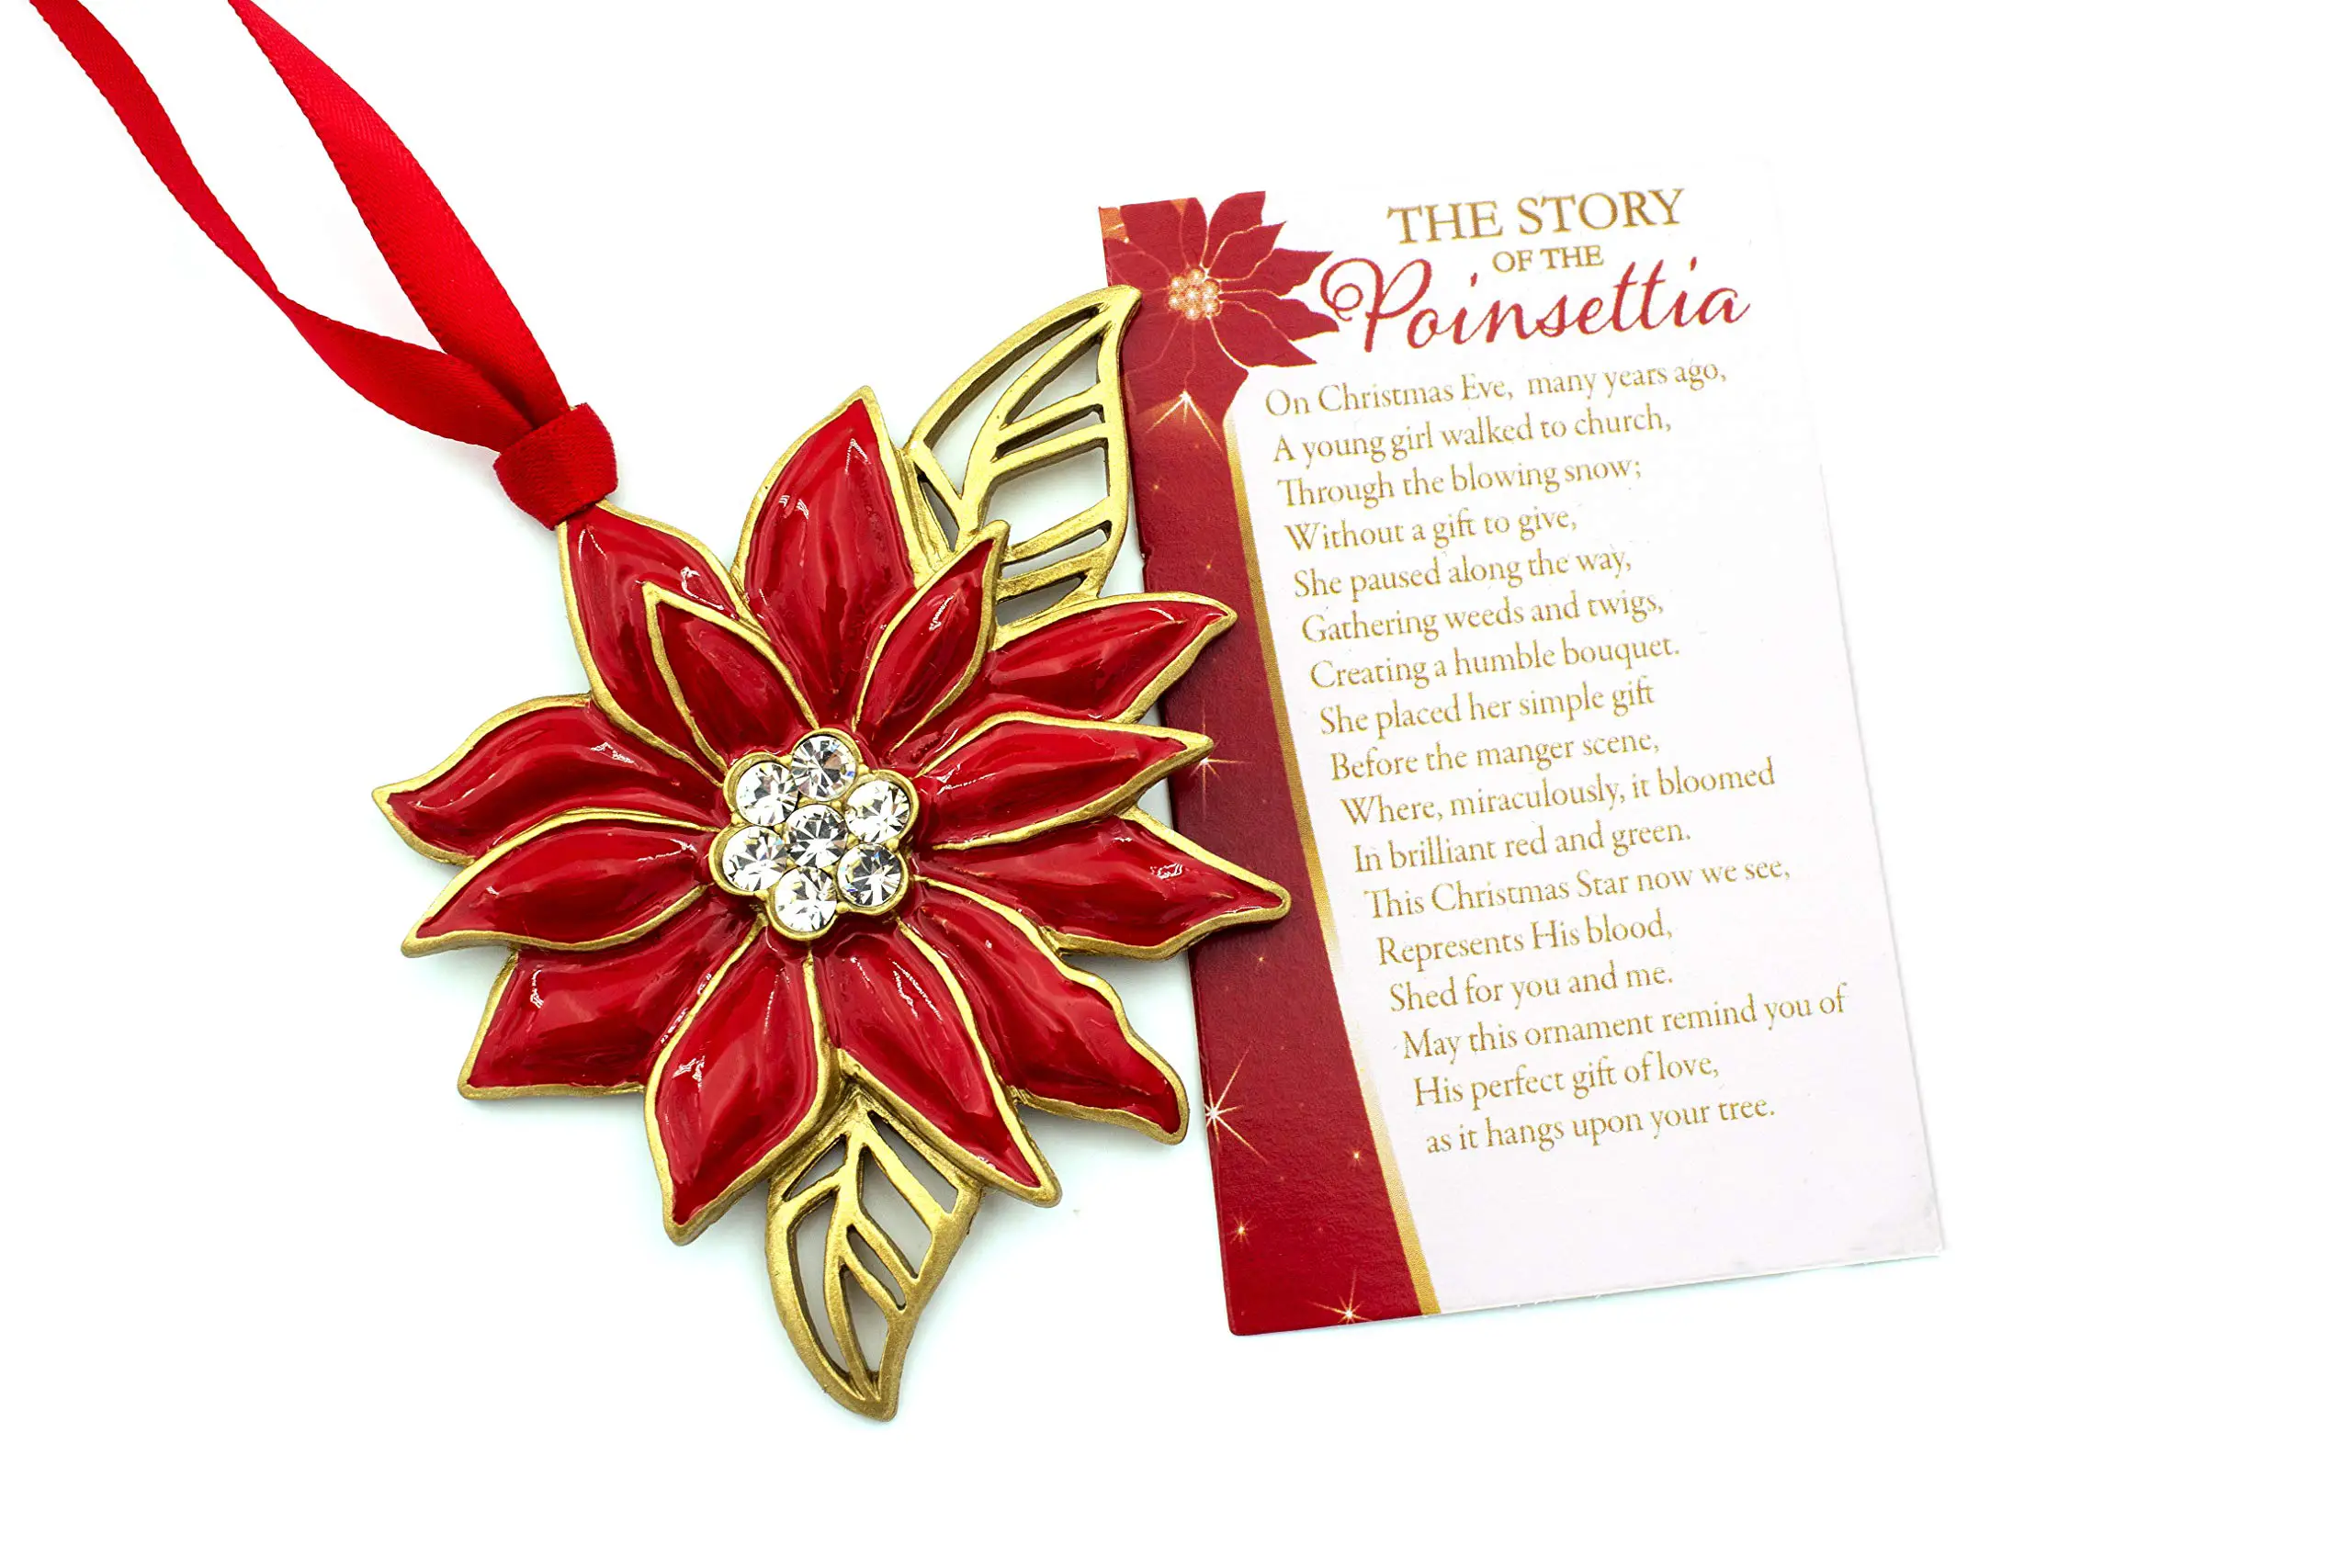 3 What Is The Symbolism Of The Shape Of Poinsettia?